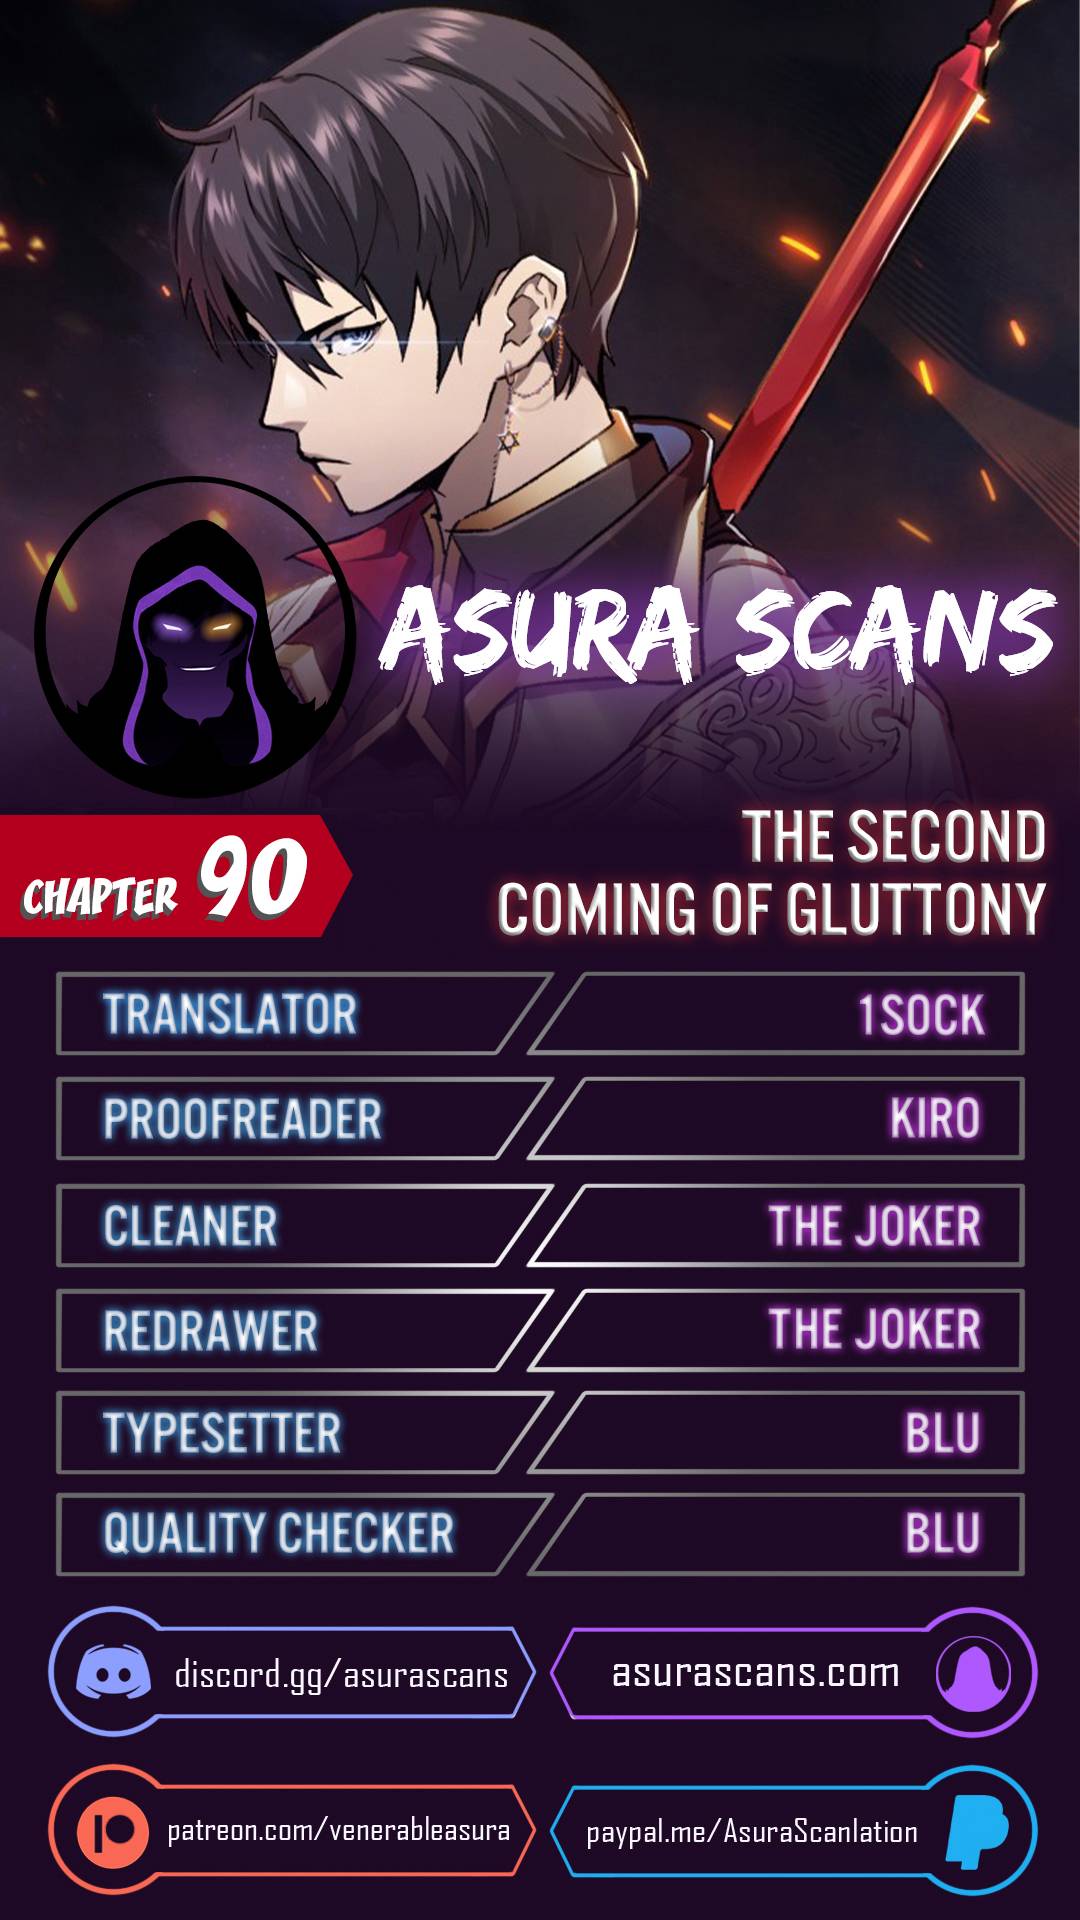 The Second Coming of Gluttony Chapter 90